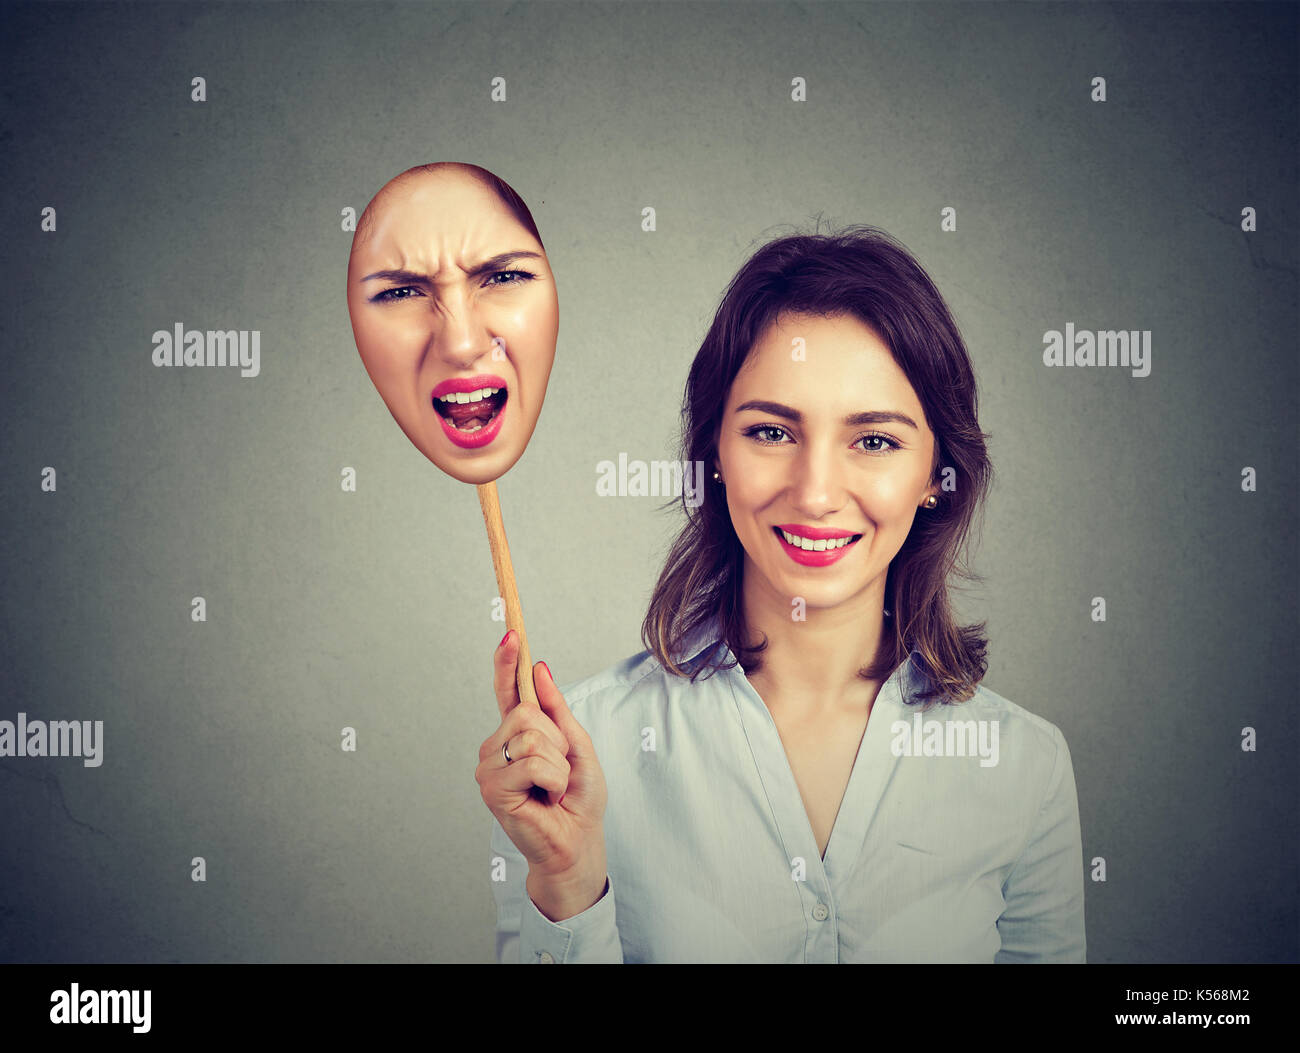 Happy smiling woman taking off an angry mask of herself Stock Photo